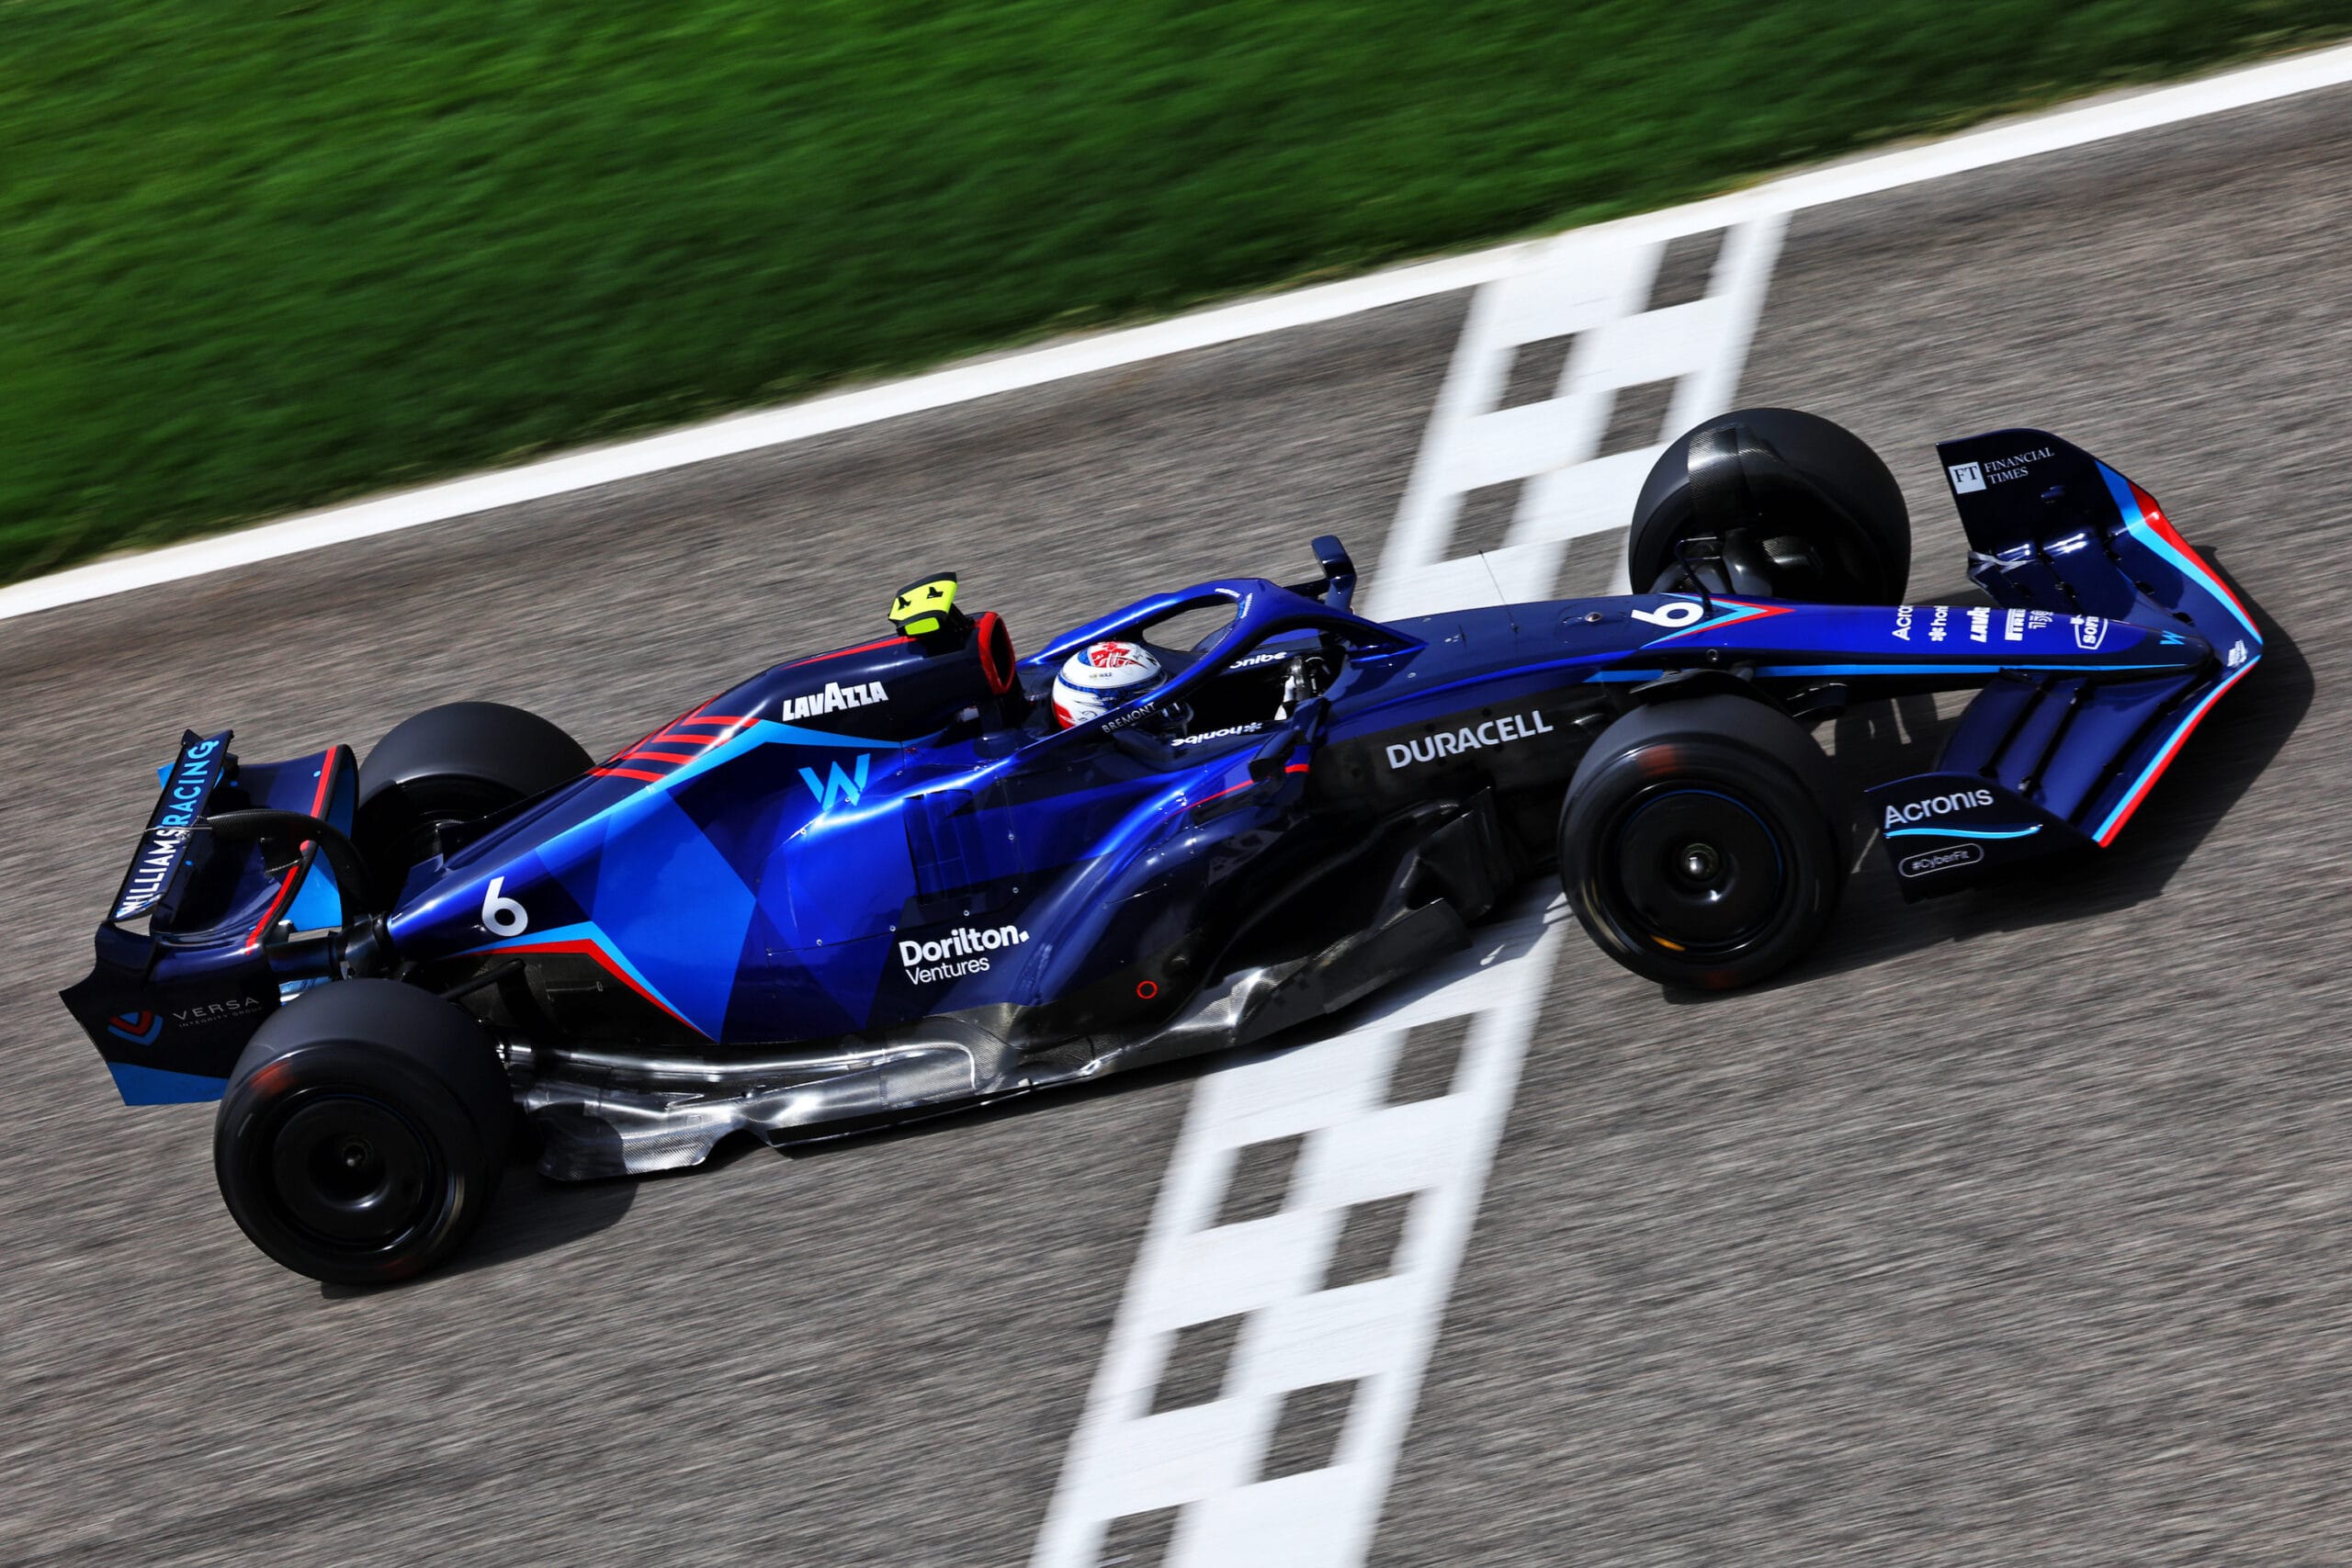 Williams In a Good Position as F1 2022 Season Approaches